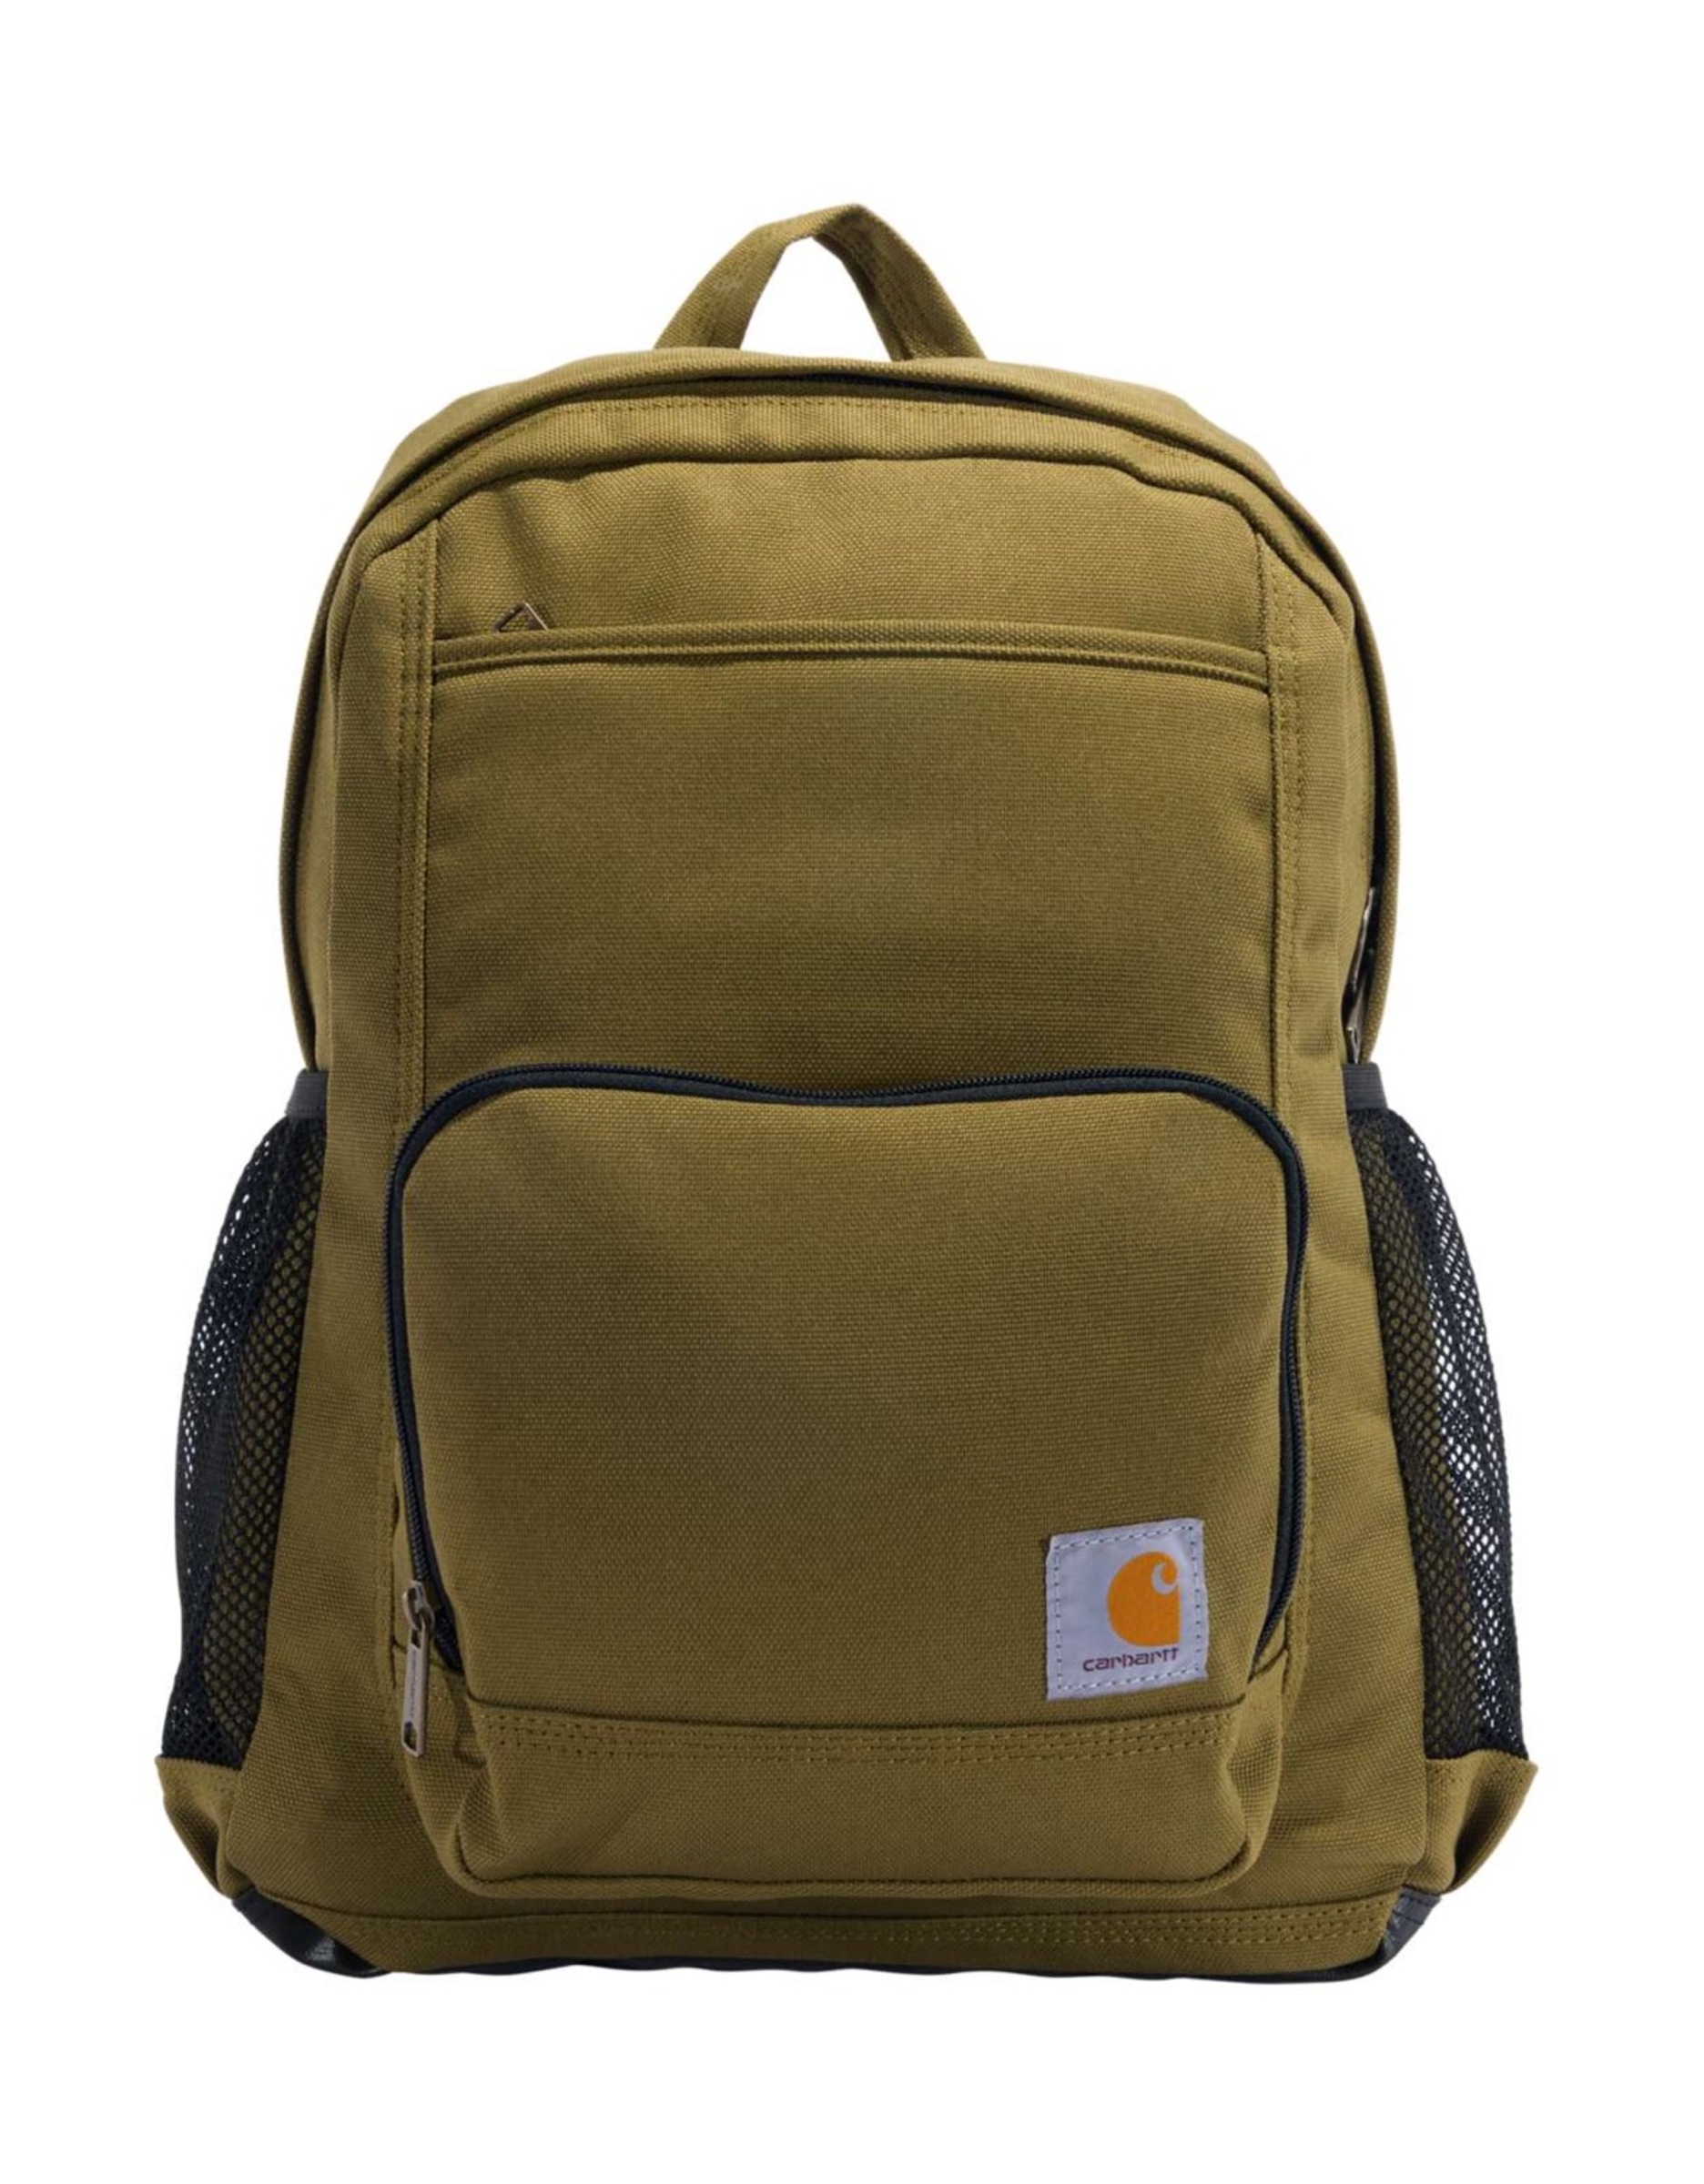 Carhartt 23l Single-Compartment Backpack - Basil - Os